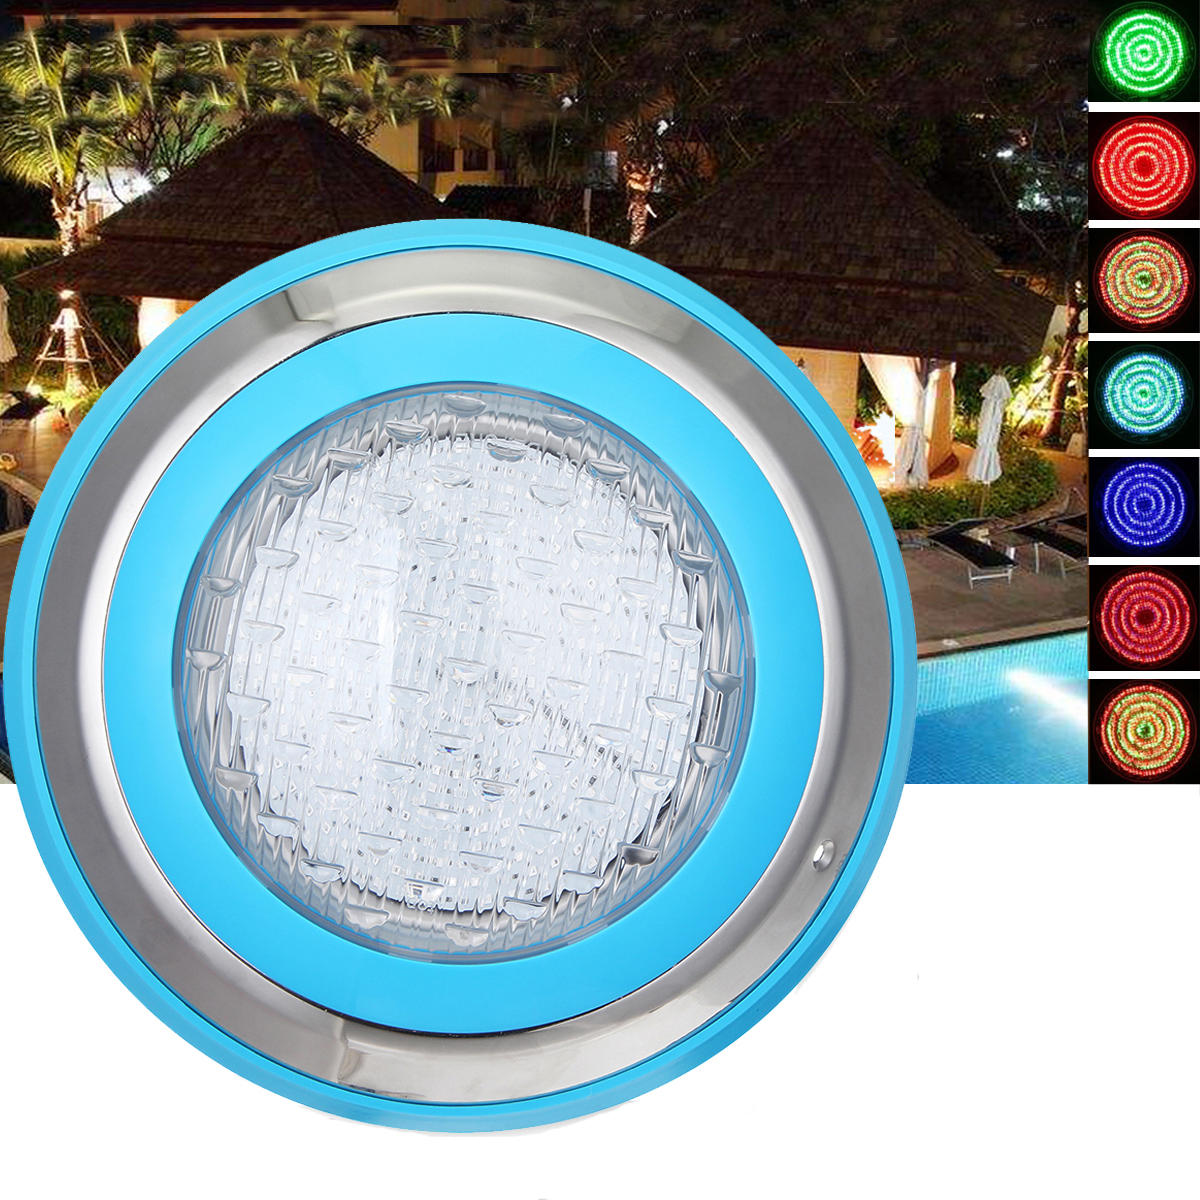 12V 35W Swimming Pool LED Light Outdoor Lantern Waterproof Underwater Lamp With Remote Control